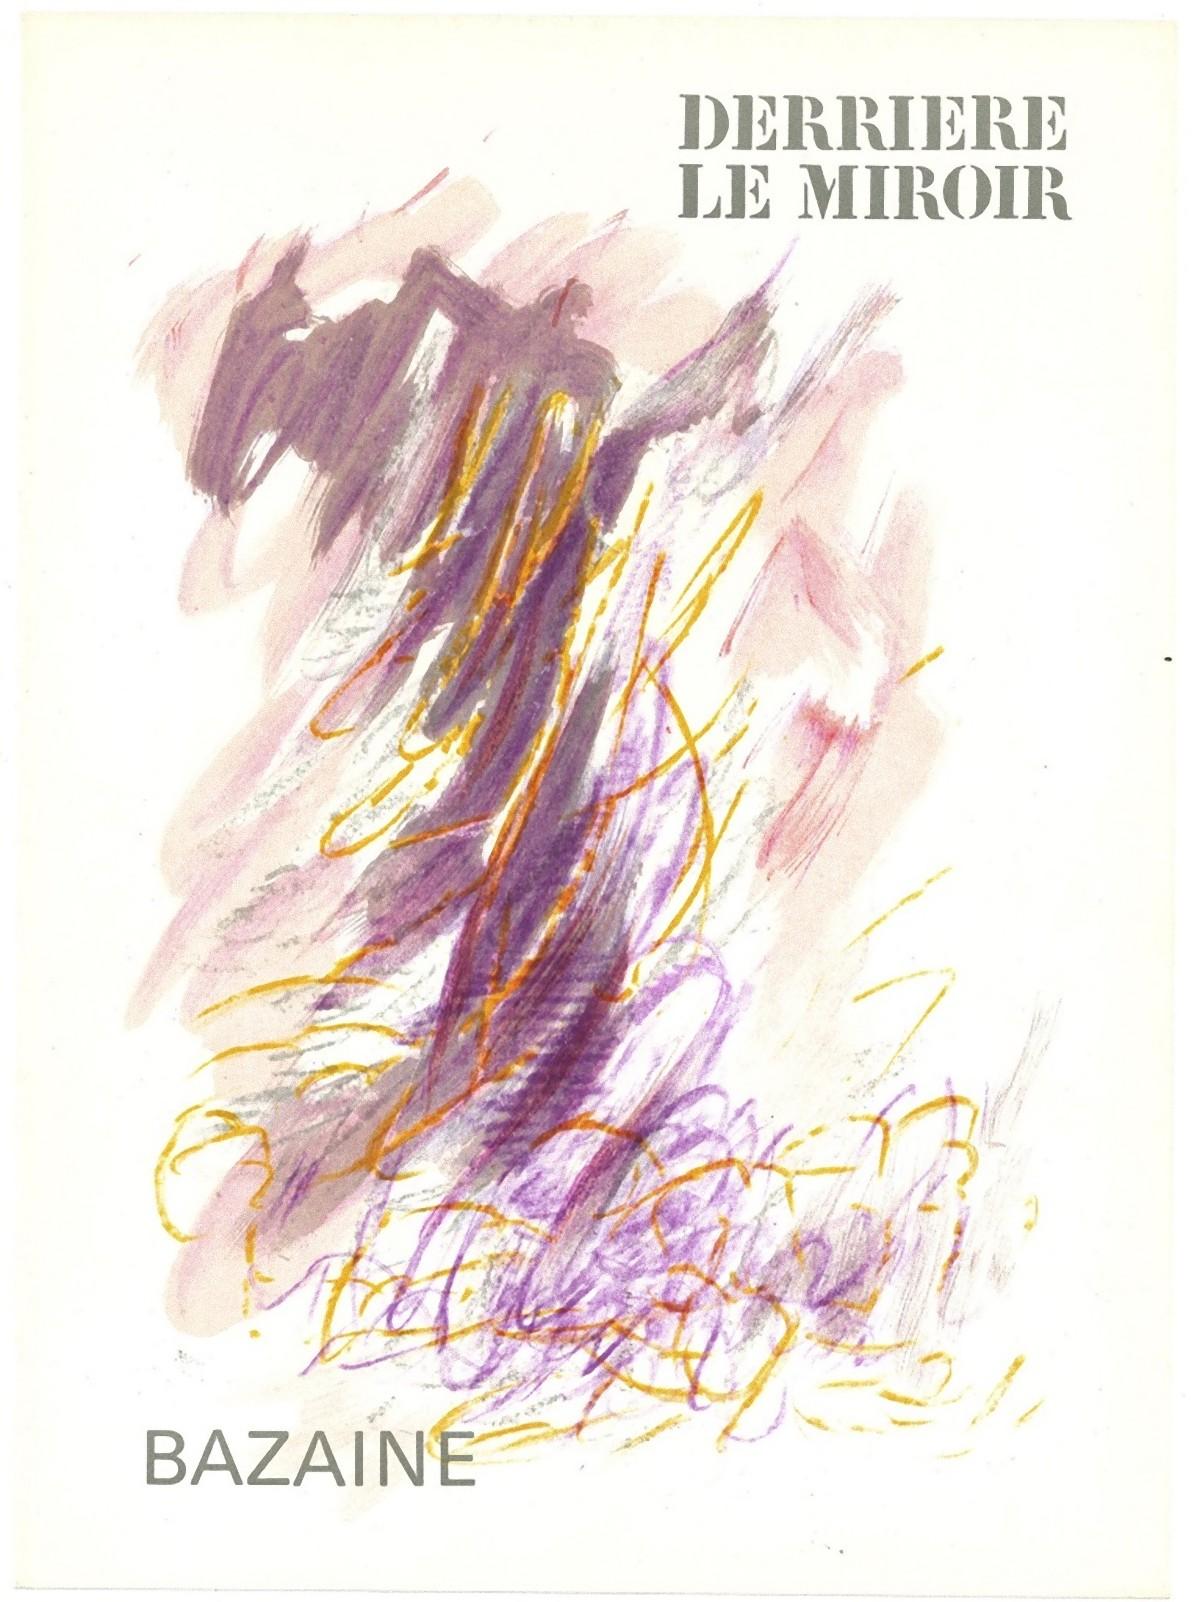 Cover for Derrière Le Miroir is an original composition realized by Bazaine in 1968, for the Art Magazine "Derrière Le Miroir no. 170..

The artwork is in good conditions, name of the artist on the lower left corner.

On the back of the white paper